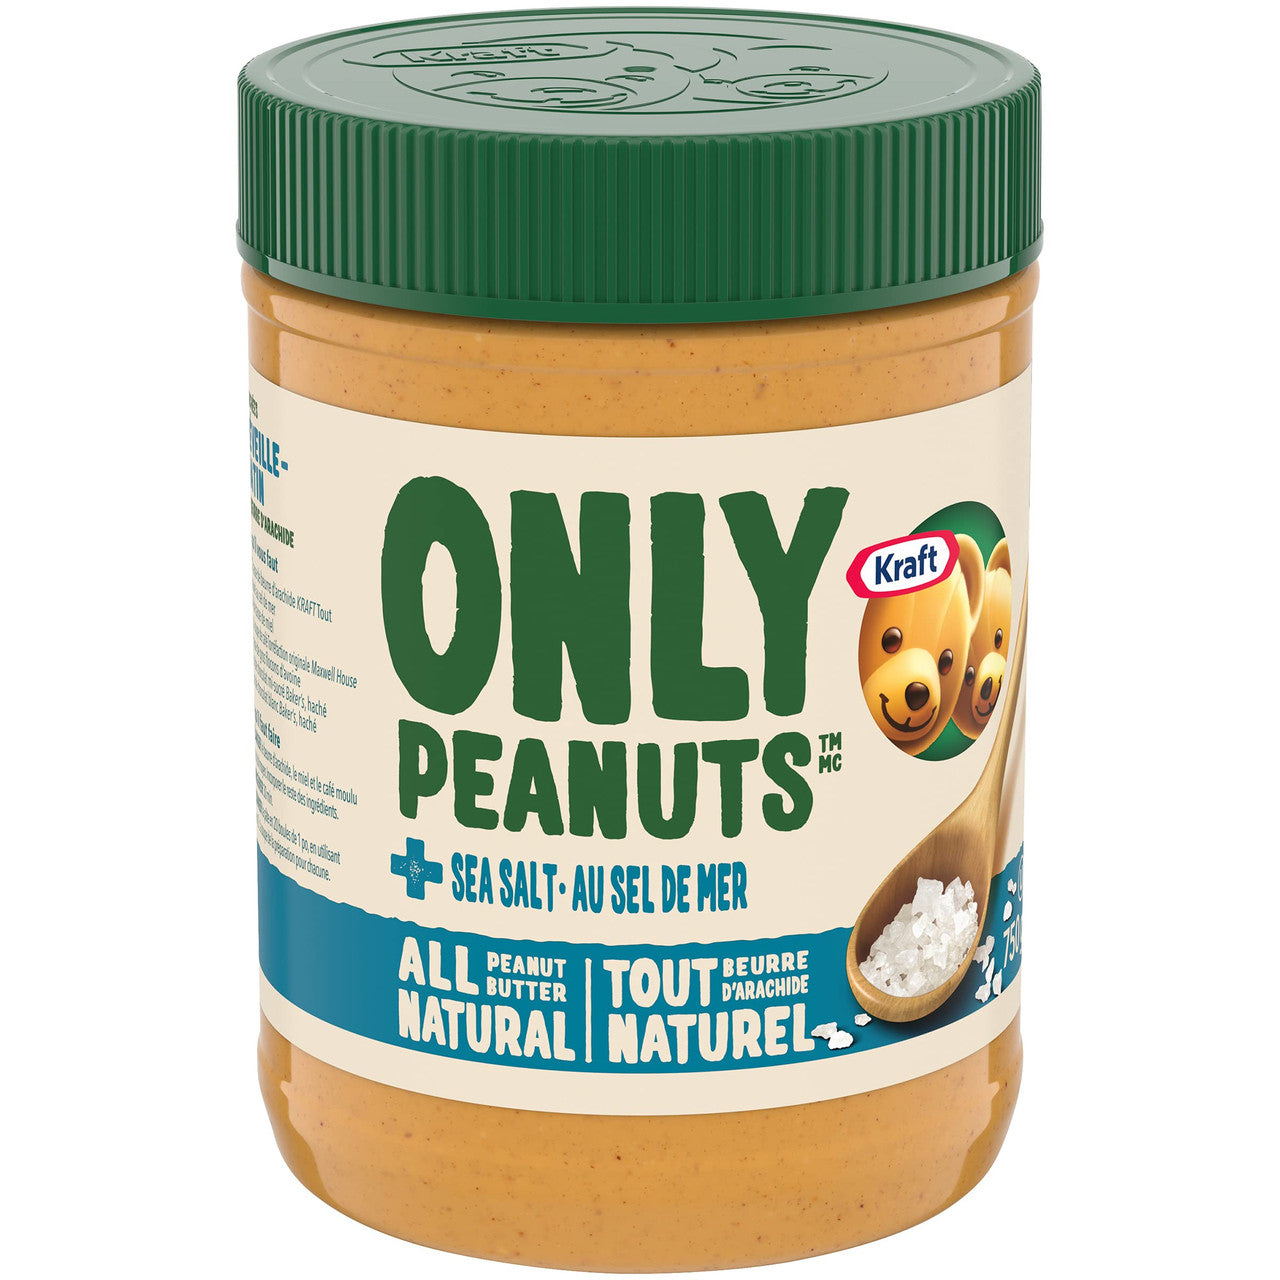 Kraft All Natural Peanut Butter with Sea Salt, 750g/26.5oz {Imported from Canada}